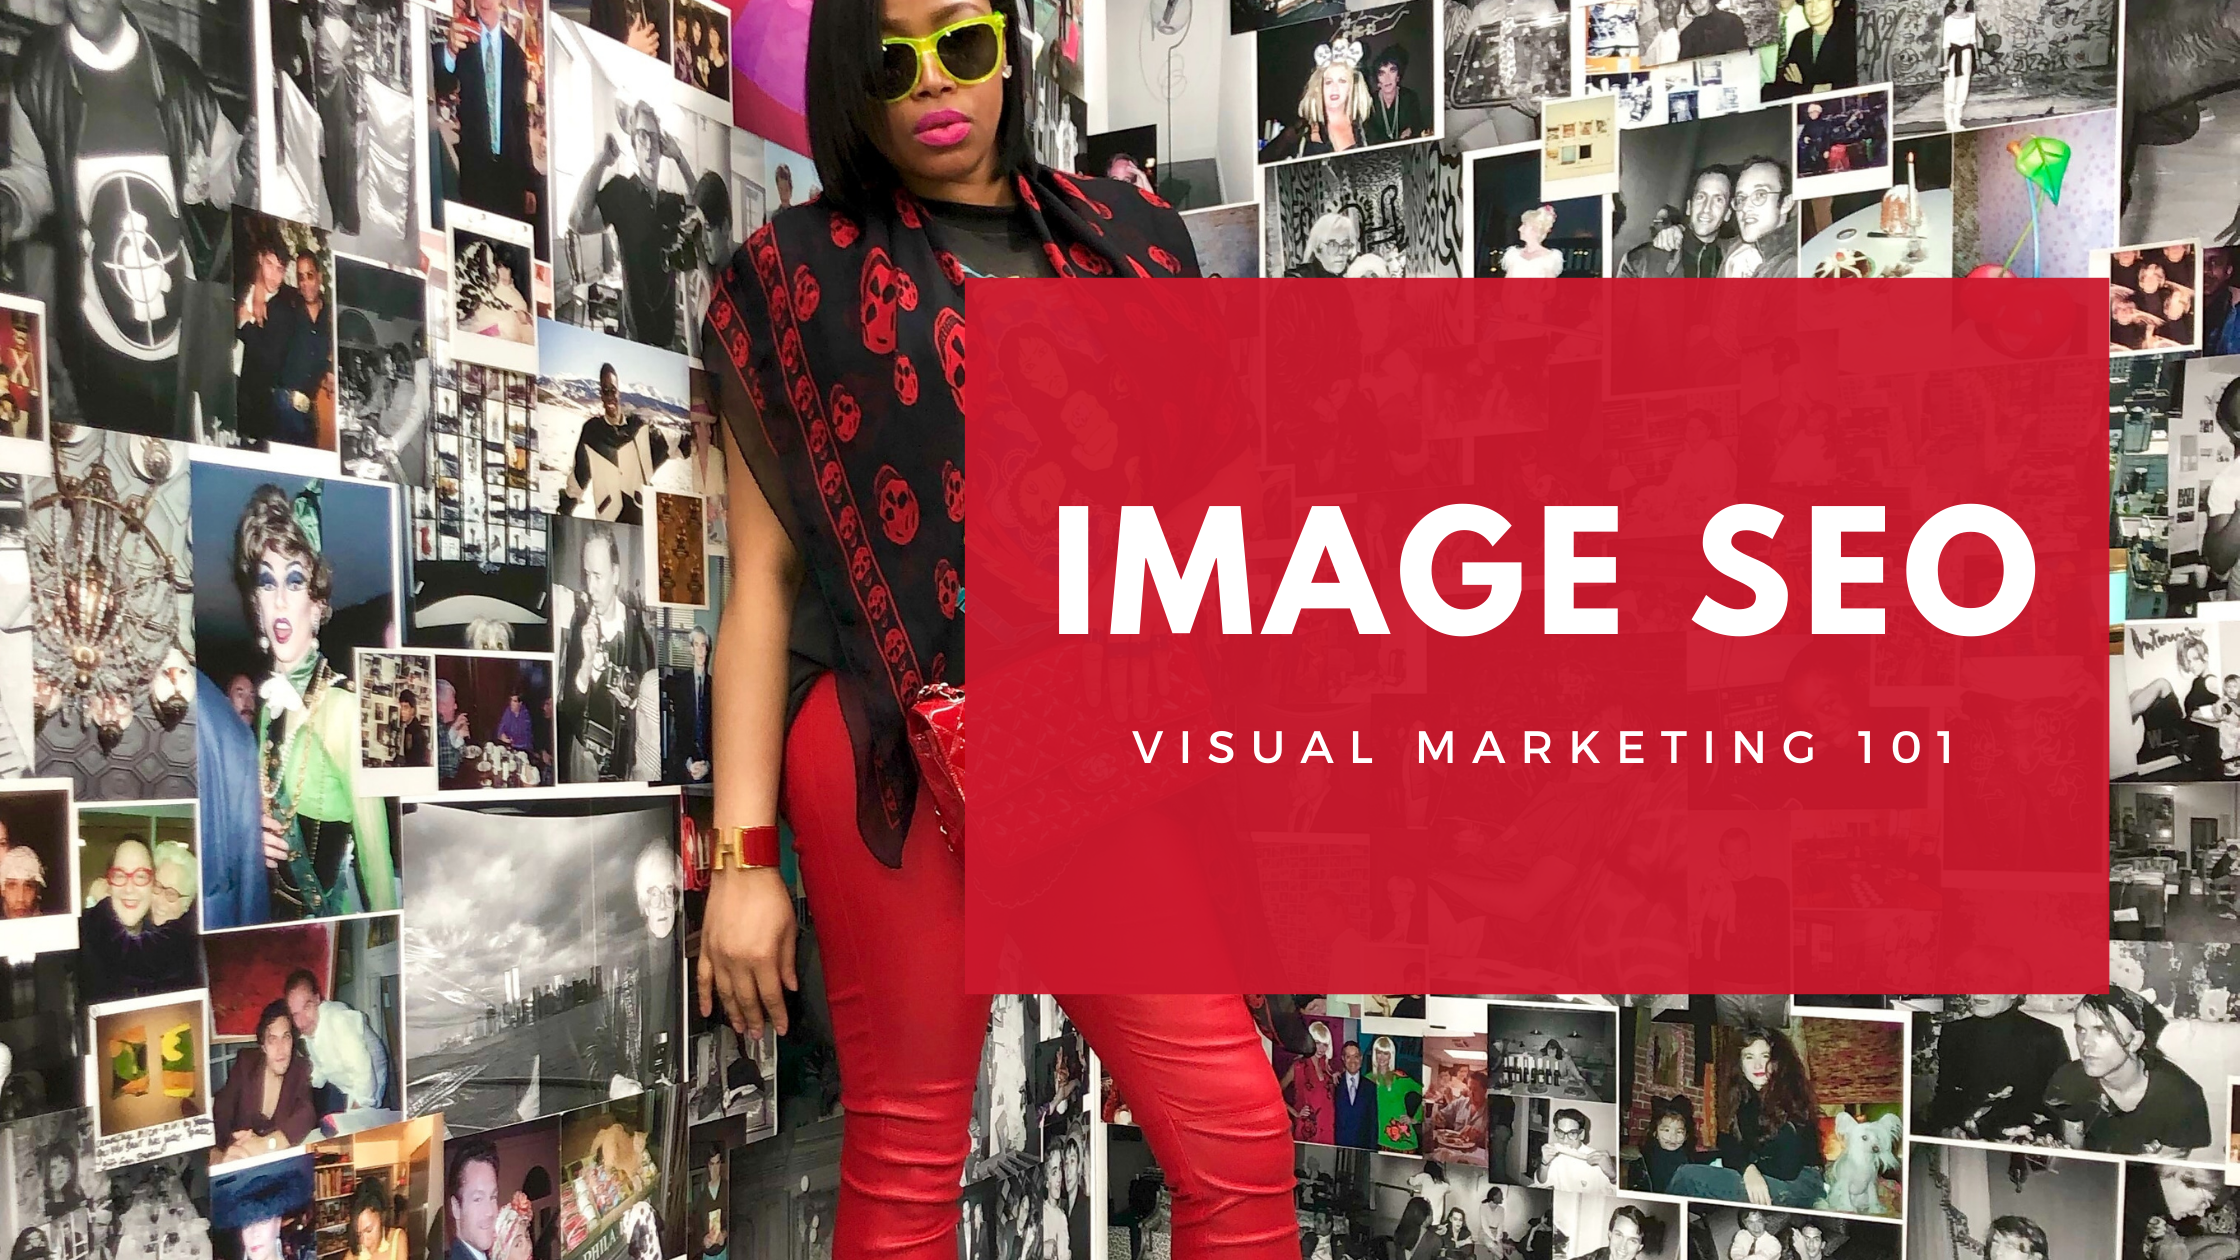 Image SEO: How to Build Visibility with a Visual Marketing Strategy